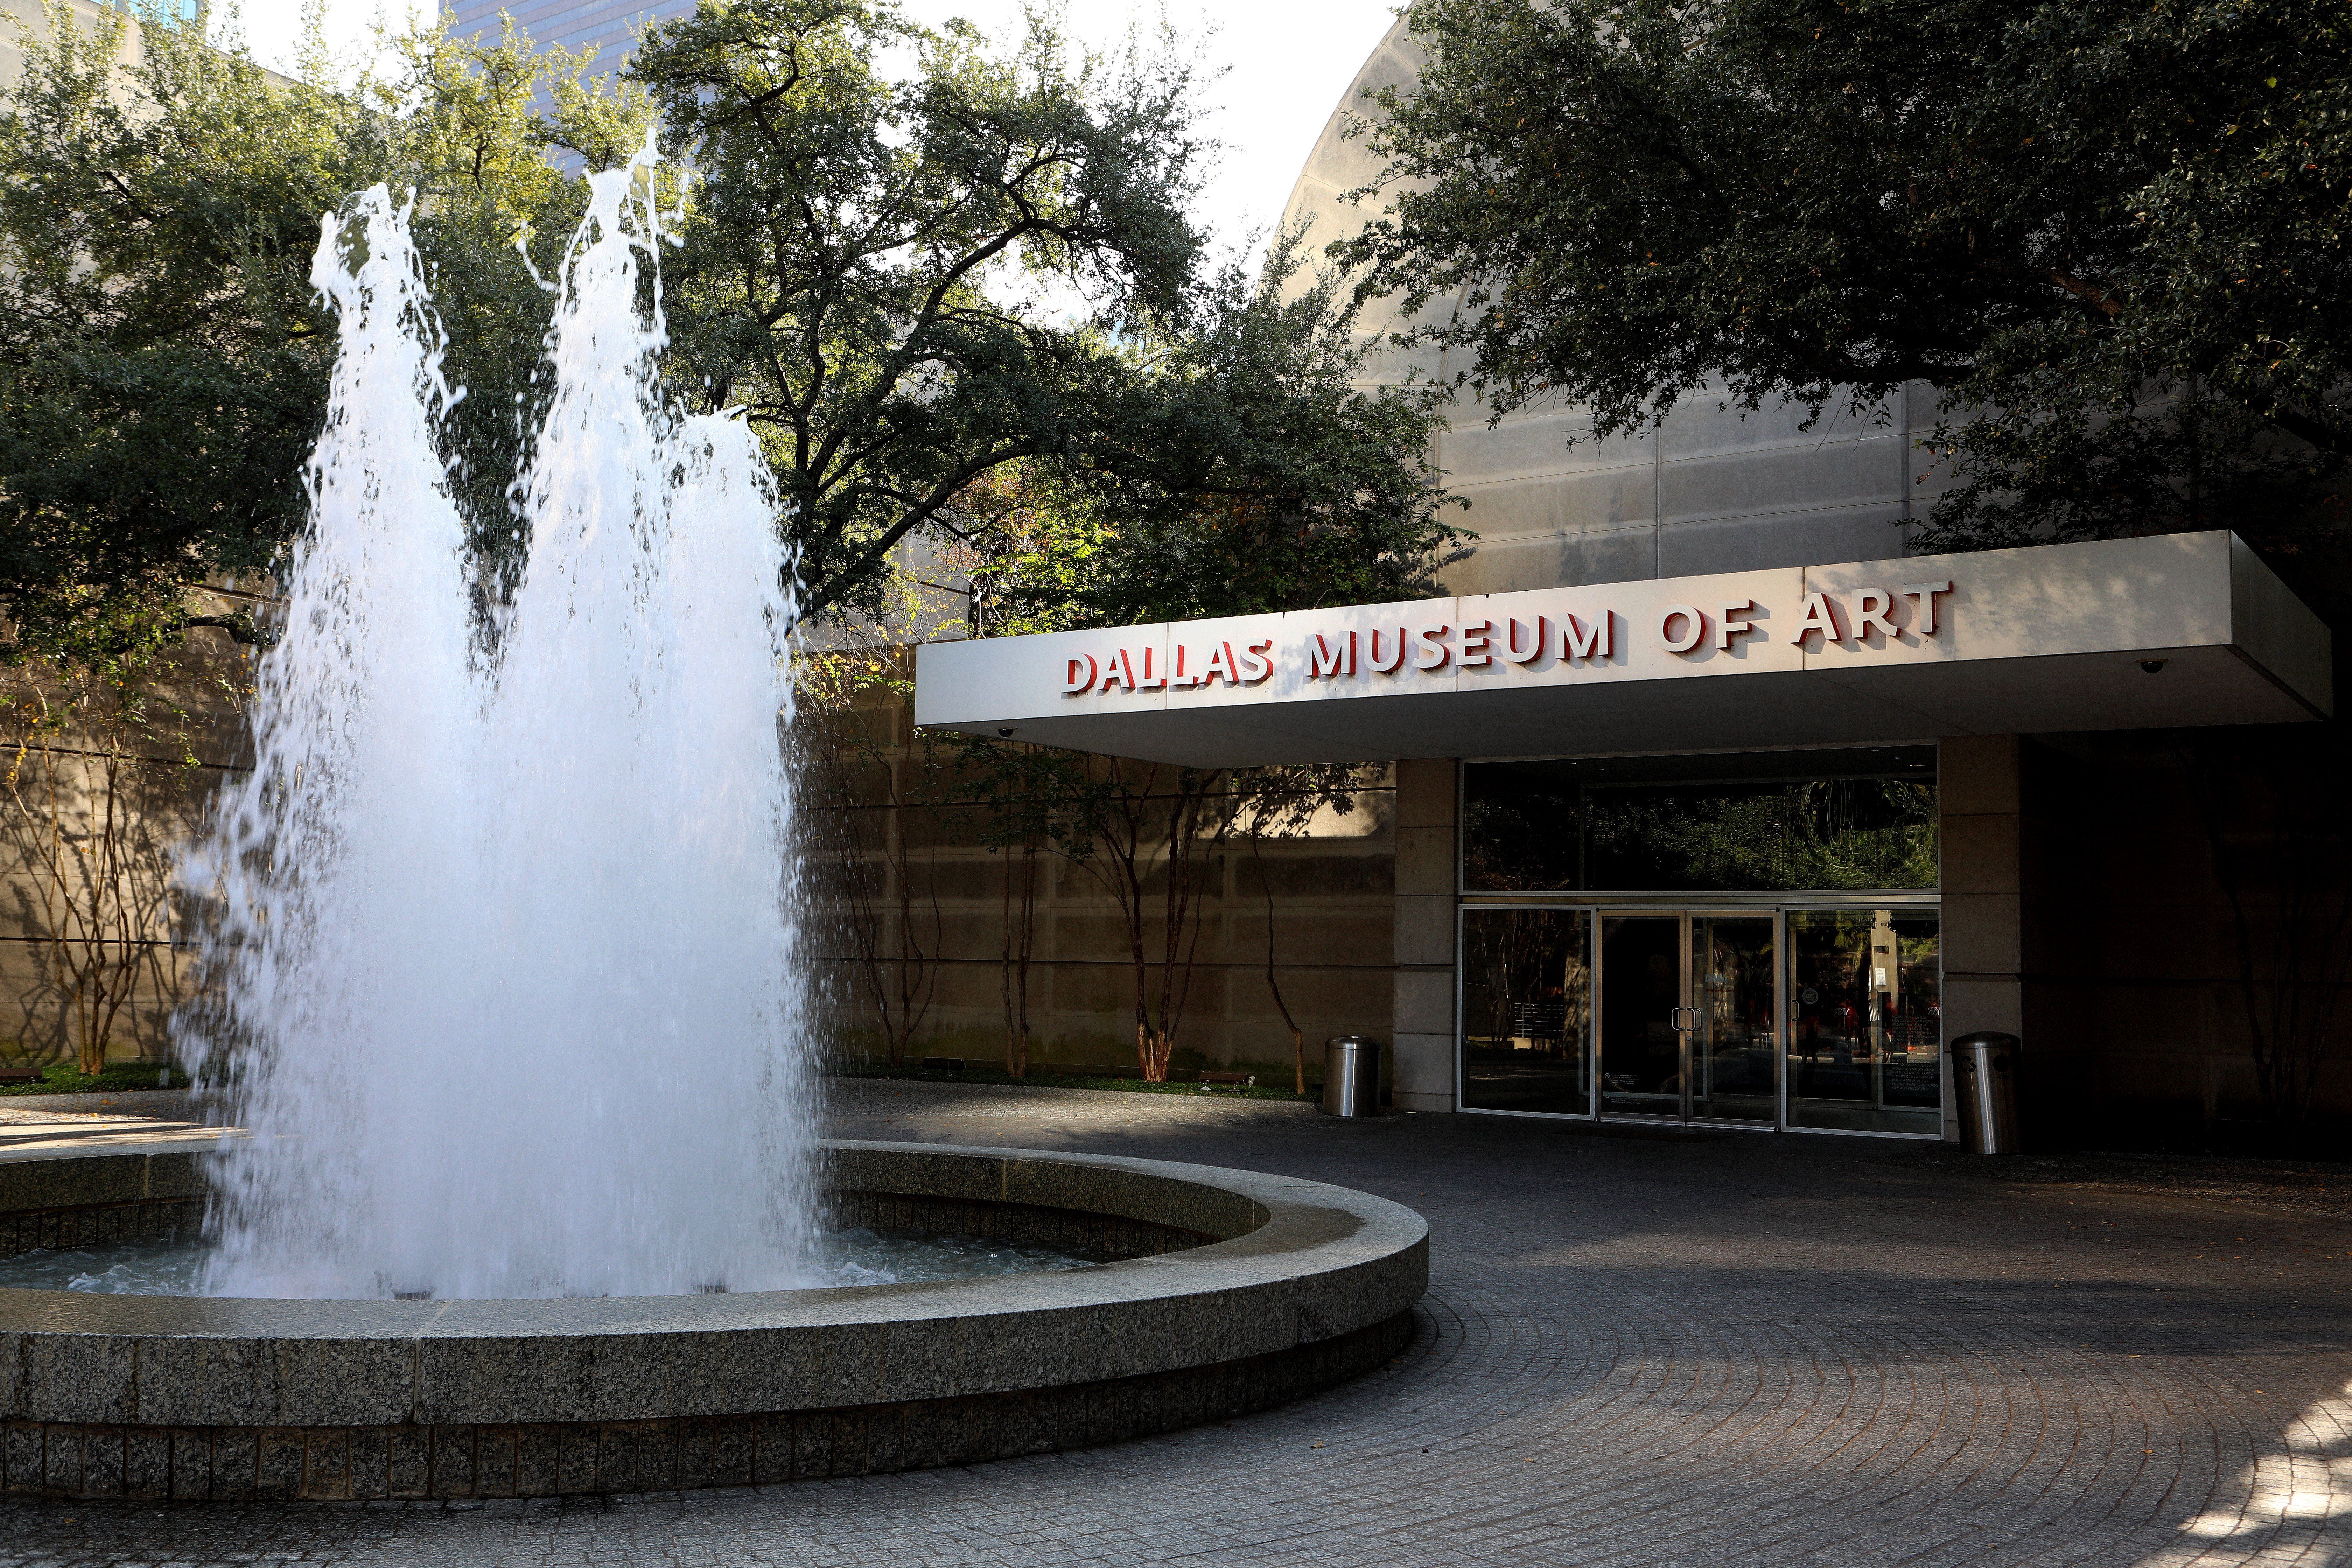 Fountain shooting water in front of sign that says "Dallas Museum of Art"